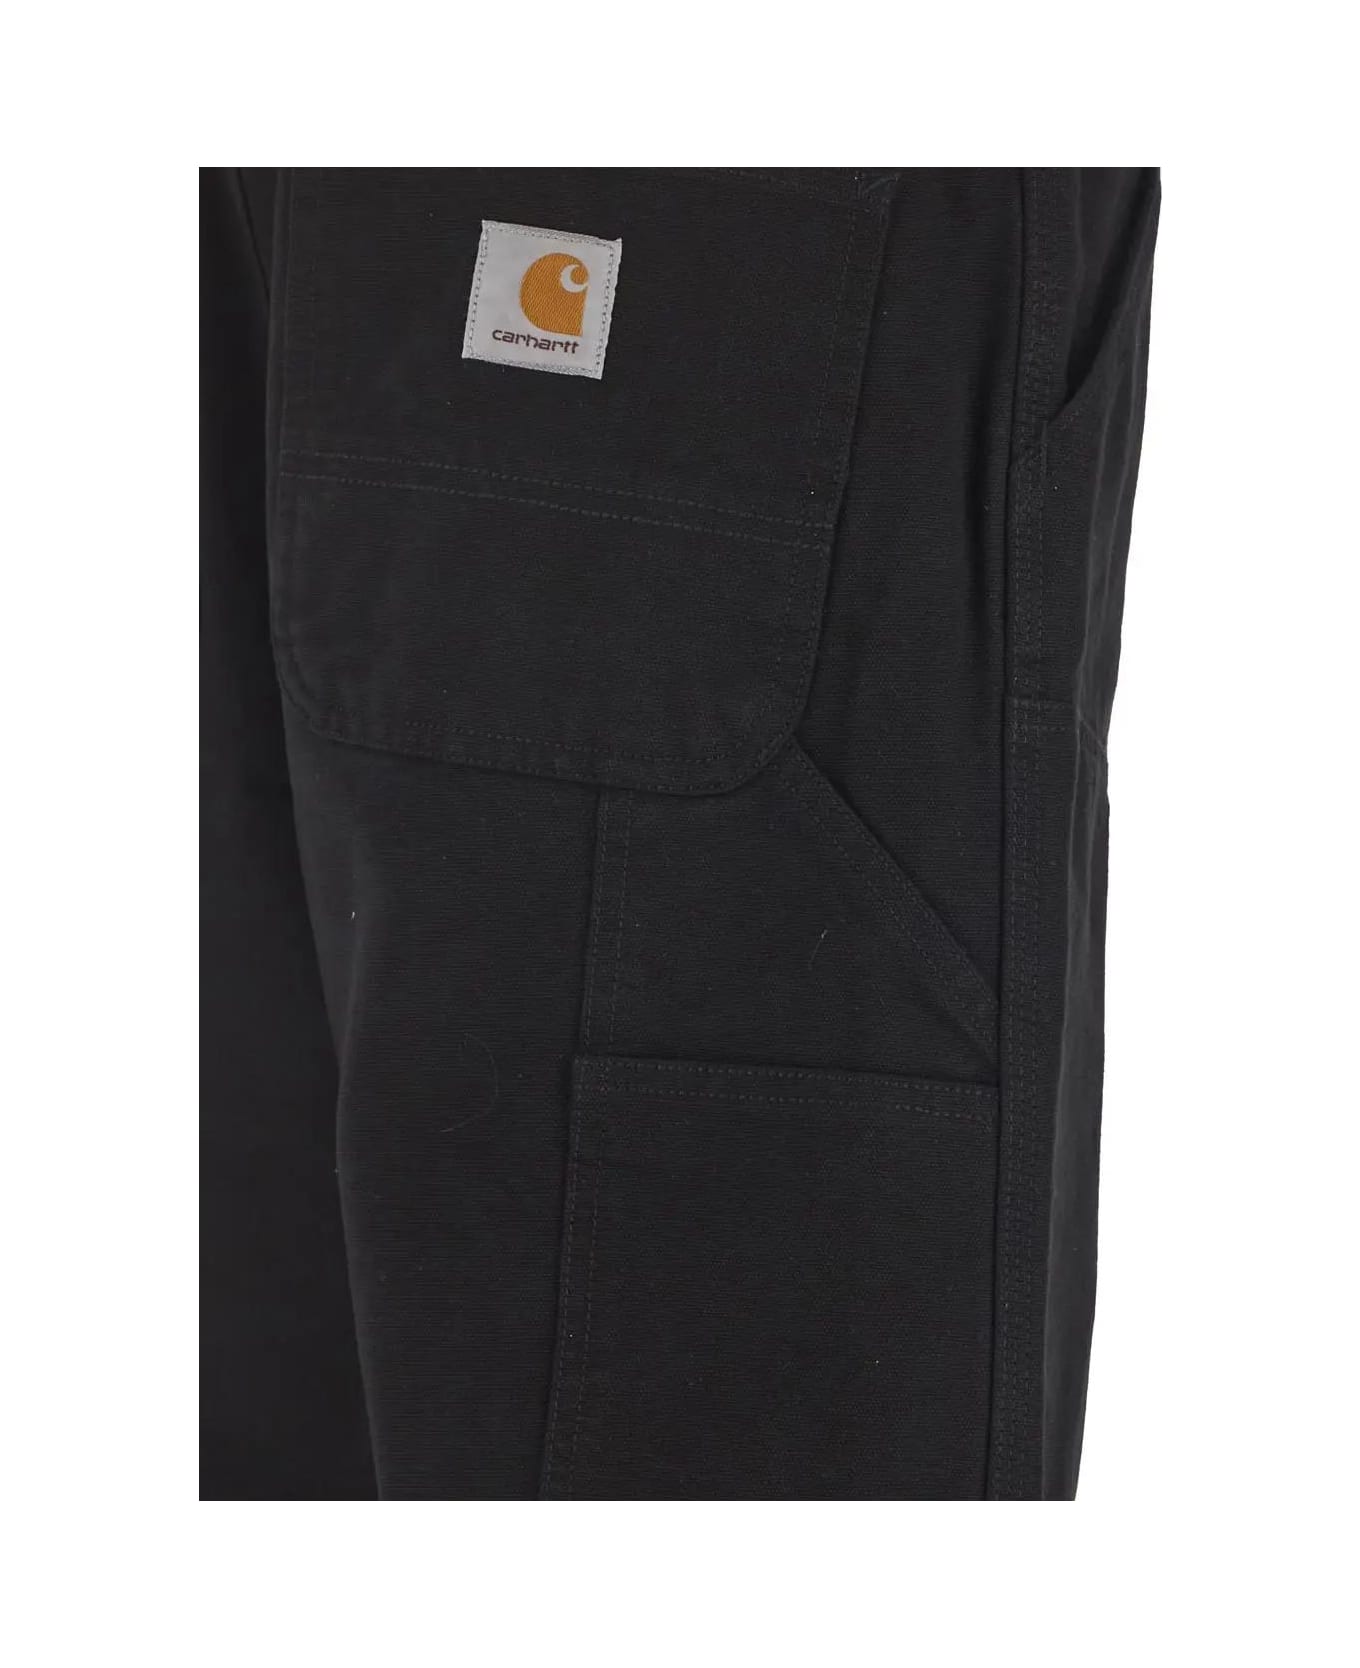 Carhartt Double Knee Pant - multicolor